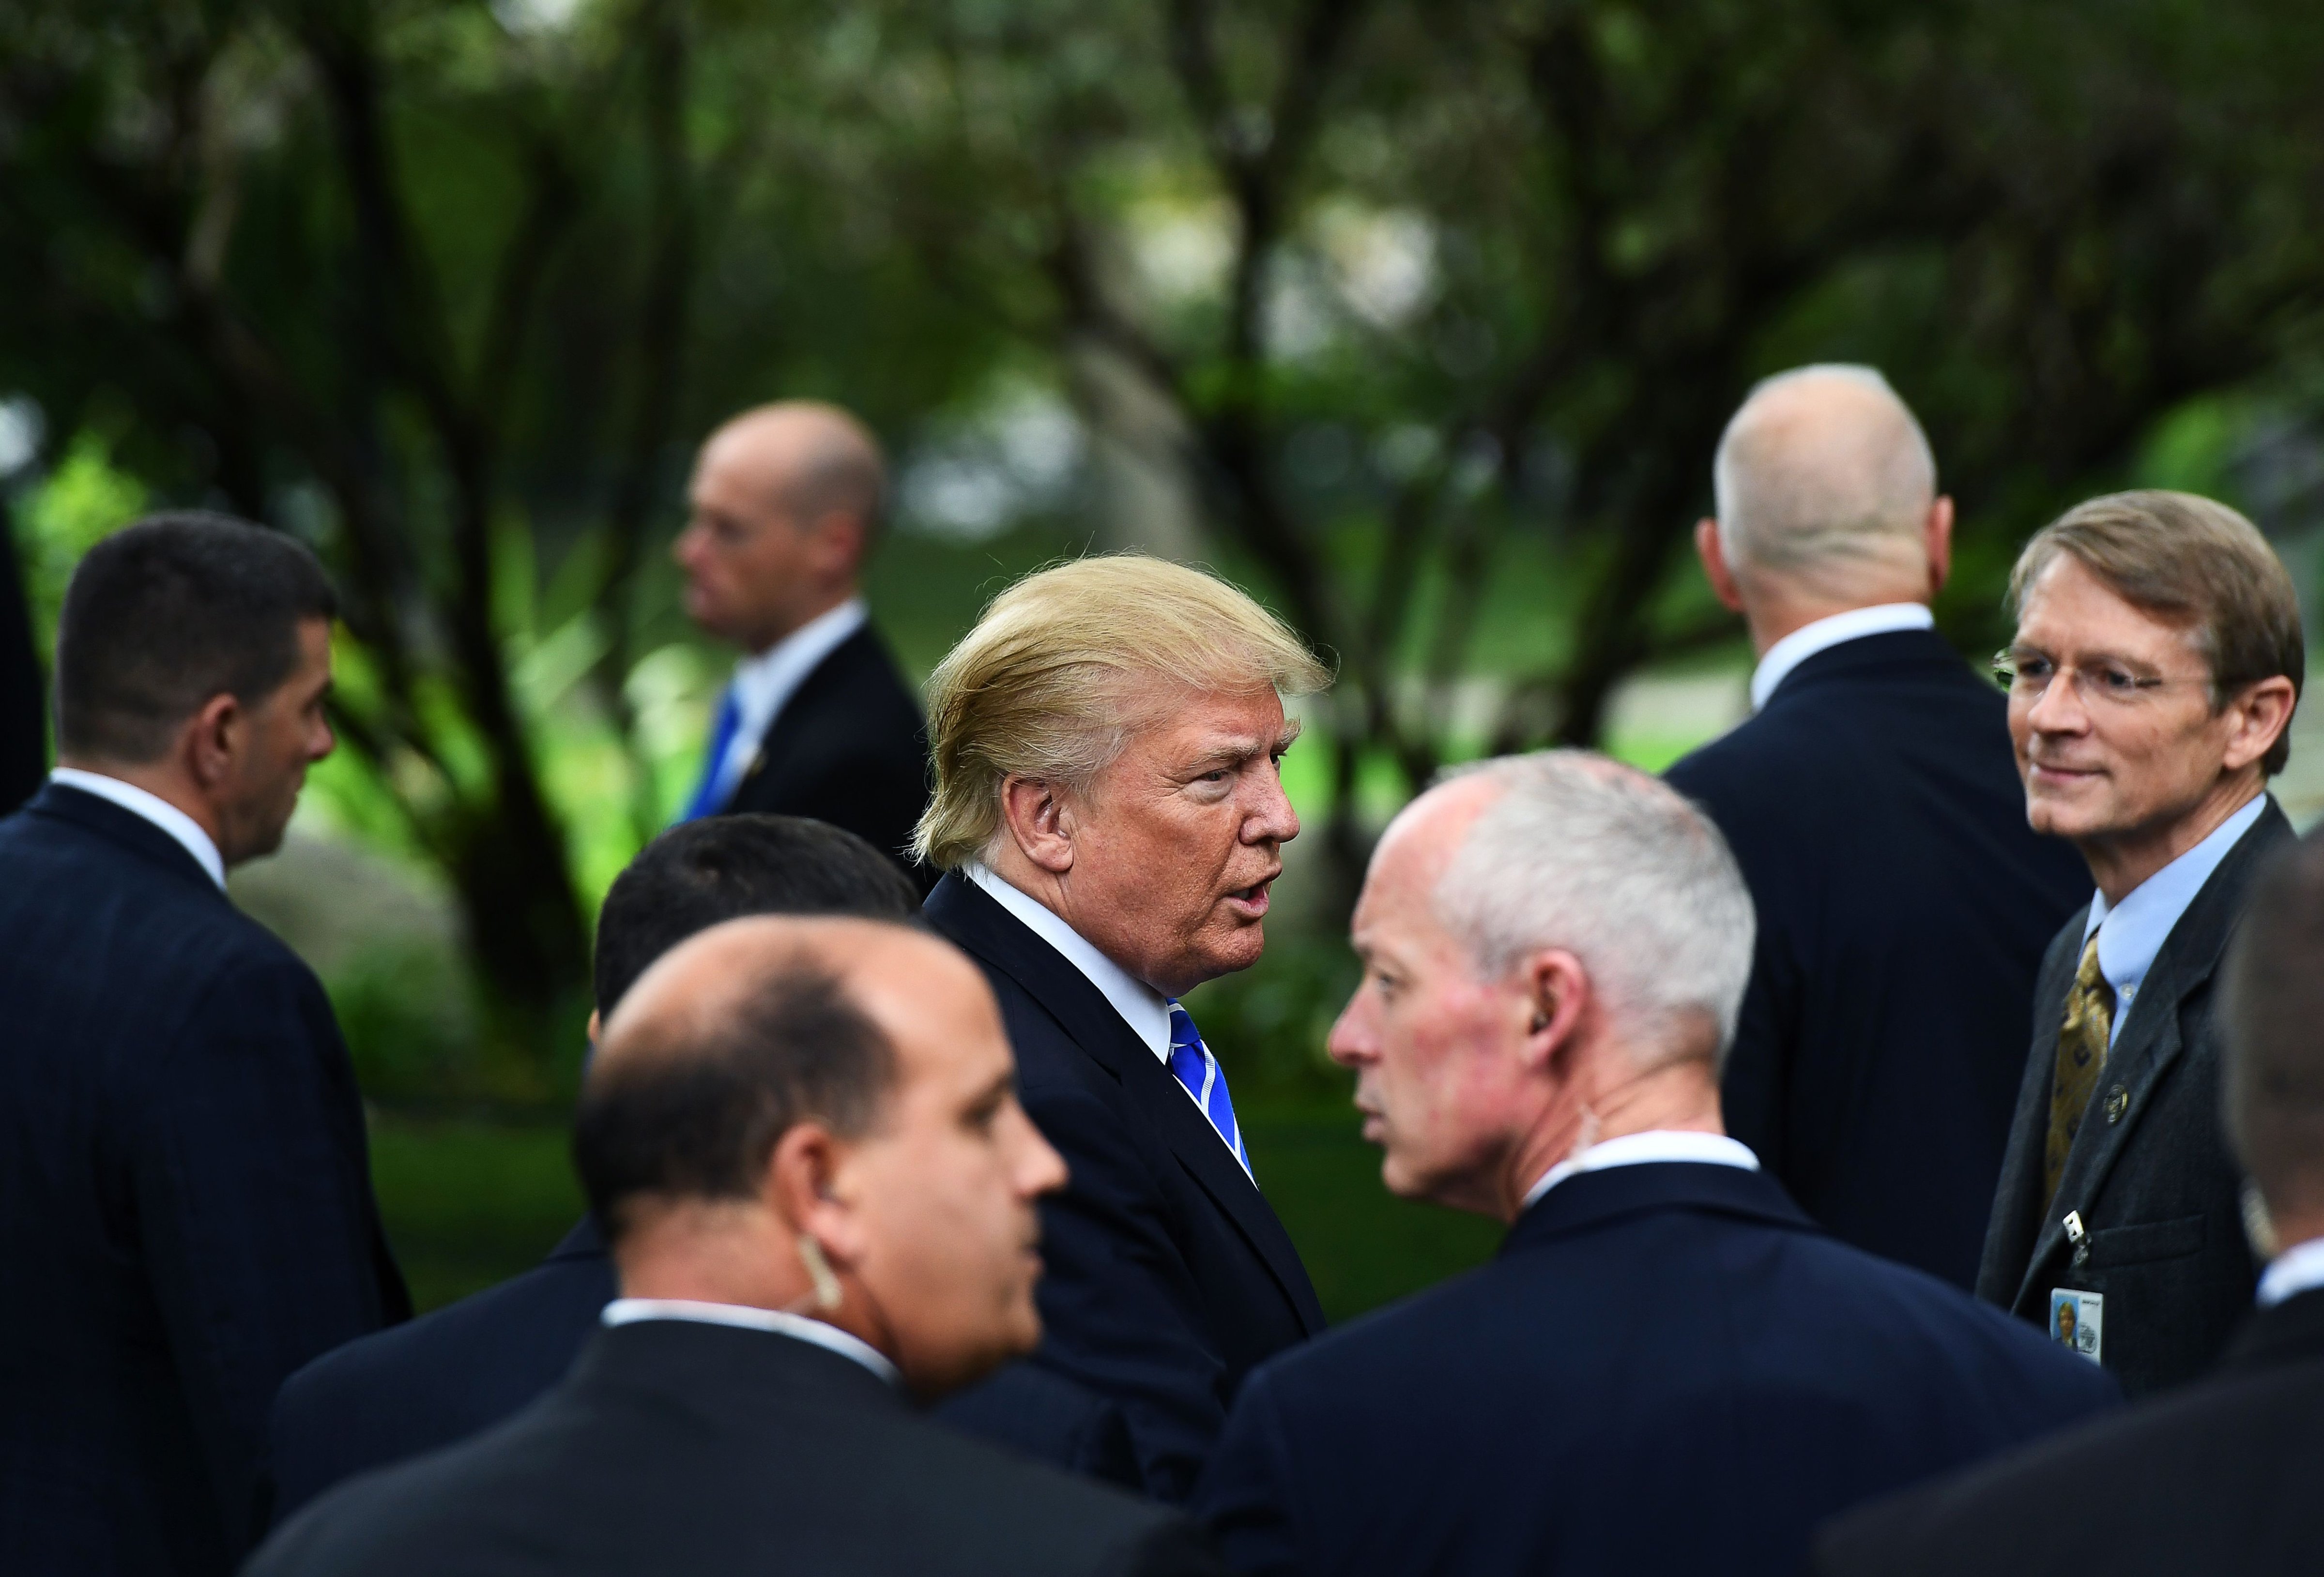 US Republican presidential nominee Donald Trump (C) is surrounded by members of the Secret Service as he visits the tomb of former US President Gerald Ford in Grand Rapids, Michigan, on September 30, 2016. (JEWEL SAMAD—AFP—Getty Images)